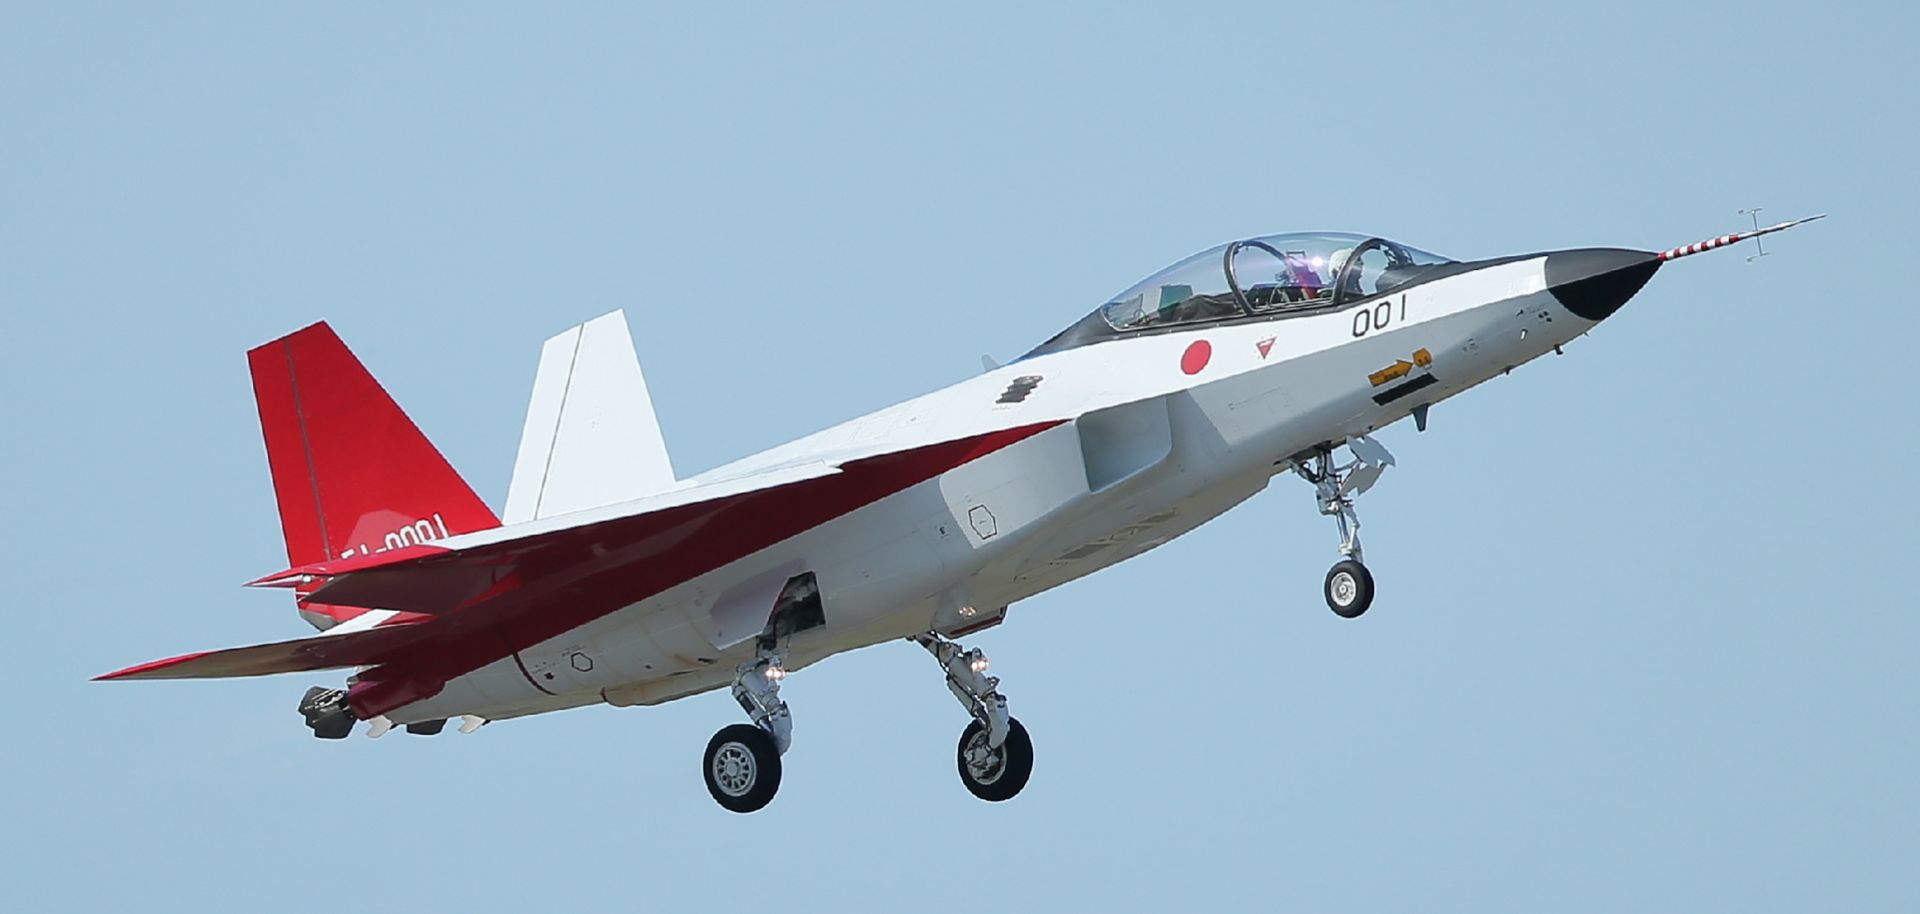 A Japanese X-2 experimental stealth fighter takes off from Komaki airport in Japan on April 22, 2016.